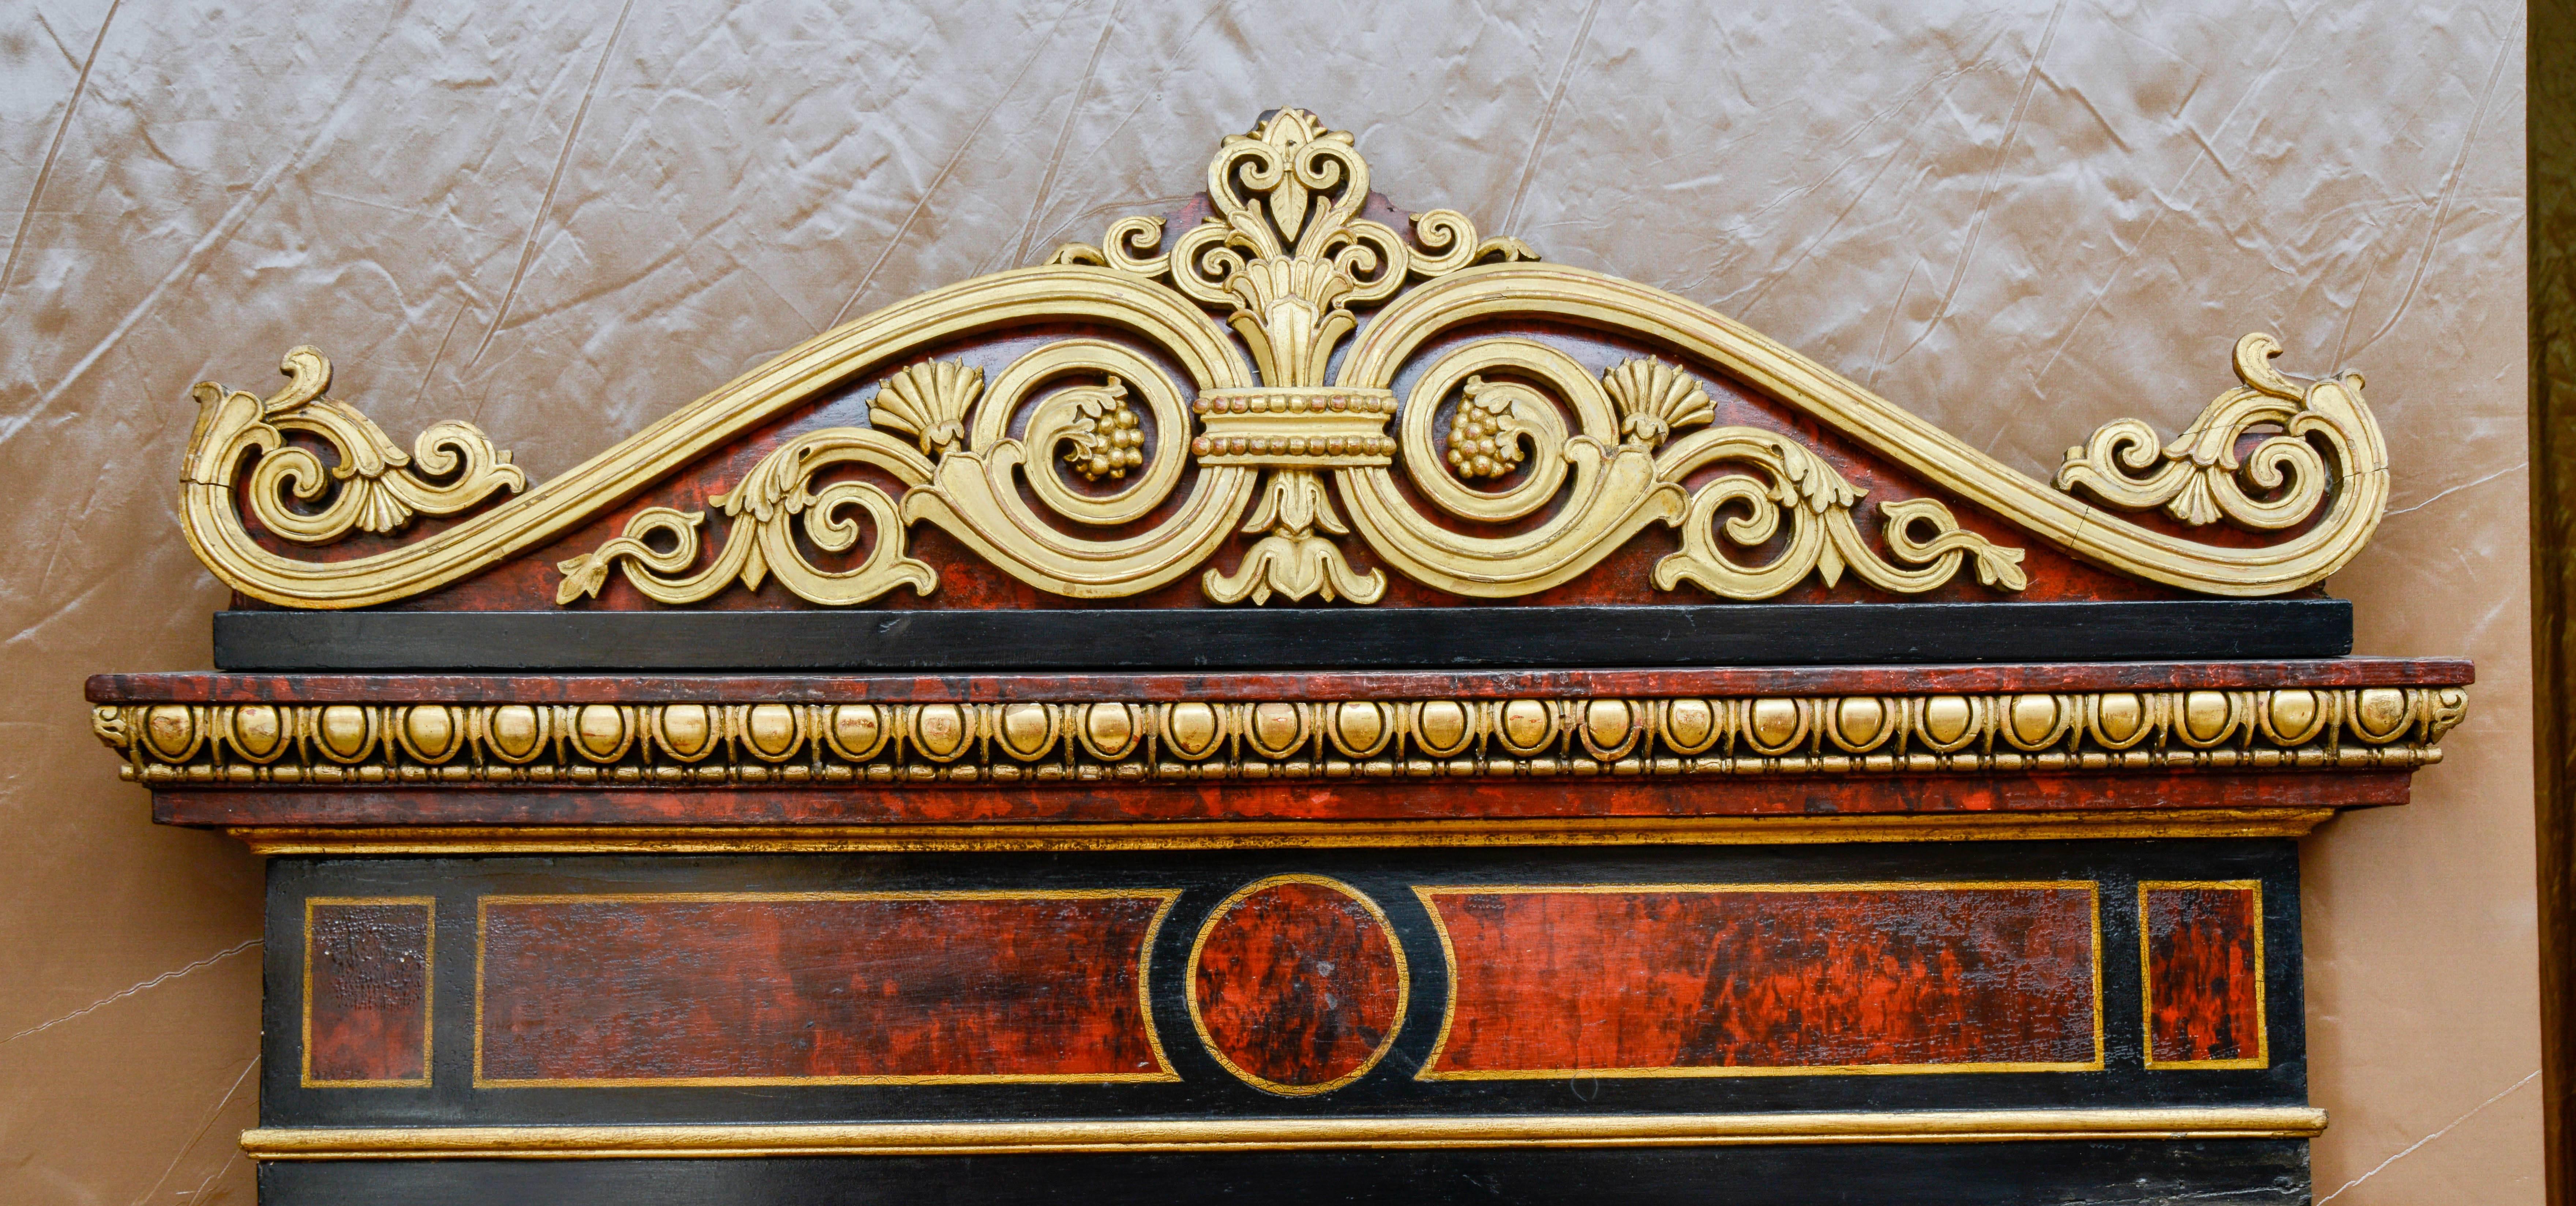 Trumeau Mirror in gilt and painted in black and red marble imitation wood, containing architectural motifs. It is framed by two Tuscan pilasters, surmounted by an entablature and a crown molding with modillions. The motif of the pediment is replaced